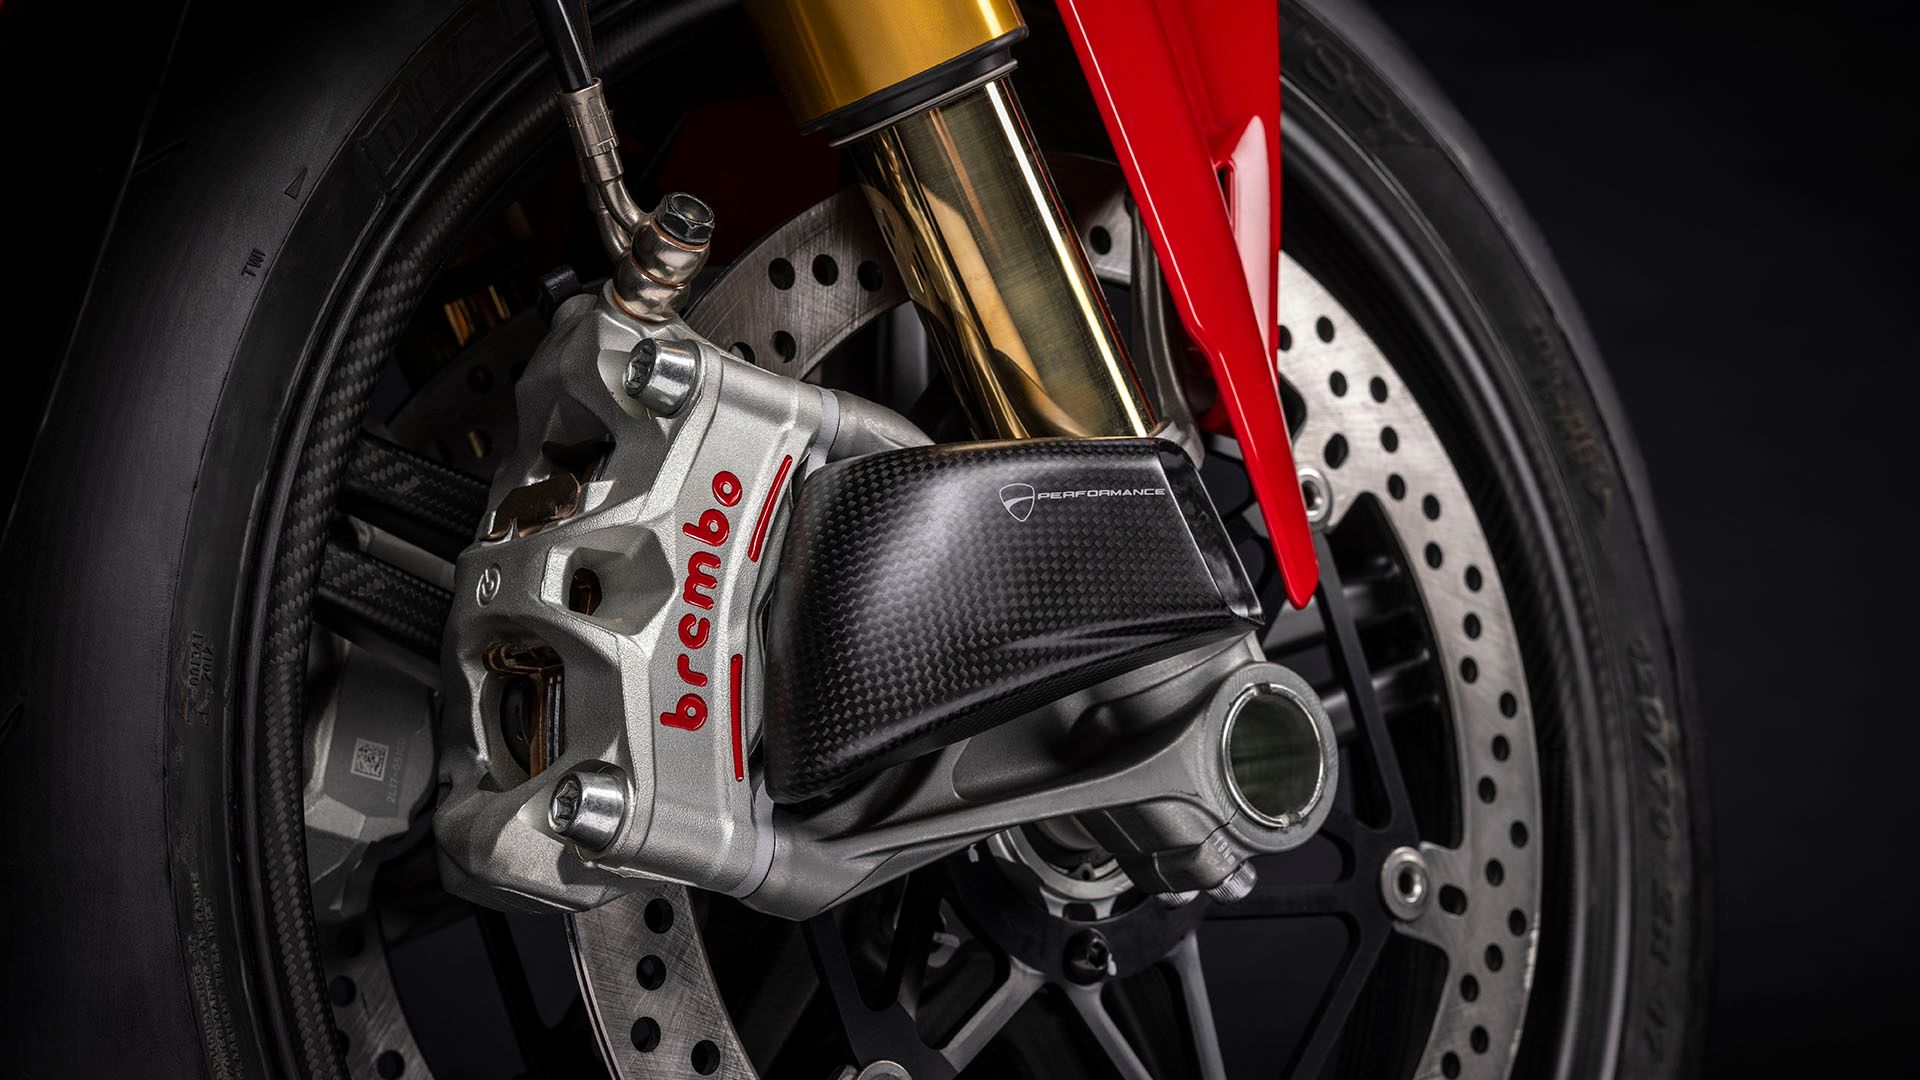 2024 Ducati Panigale V4 SP2 30th Anniversario 916 Brembo Brakes With Carbon Fiber Cooling Duct